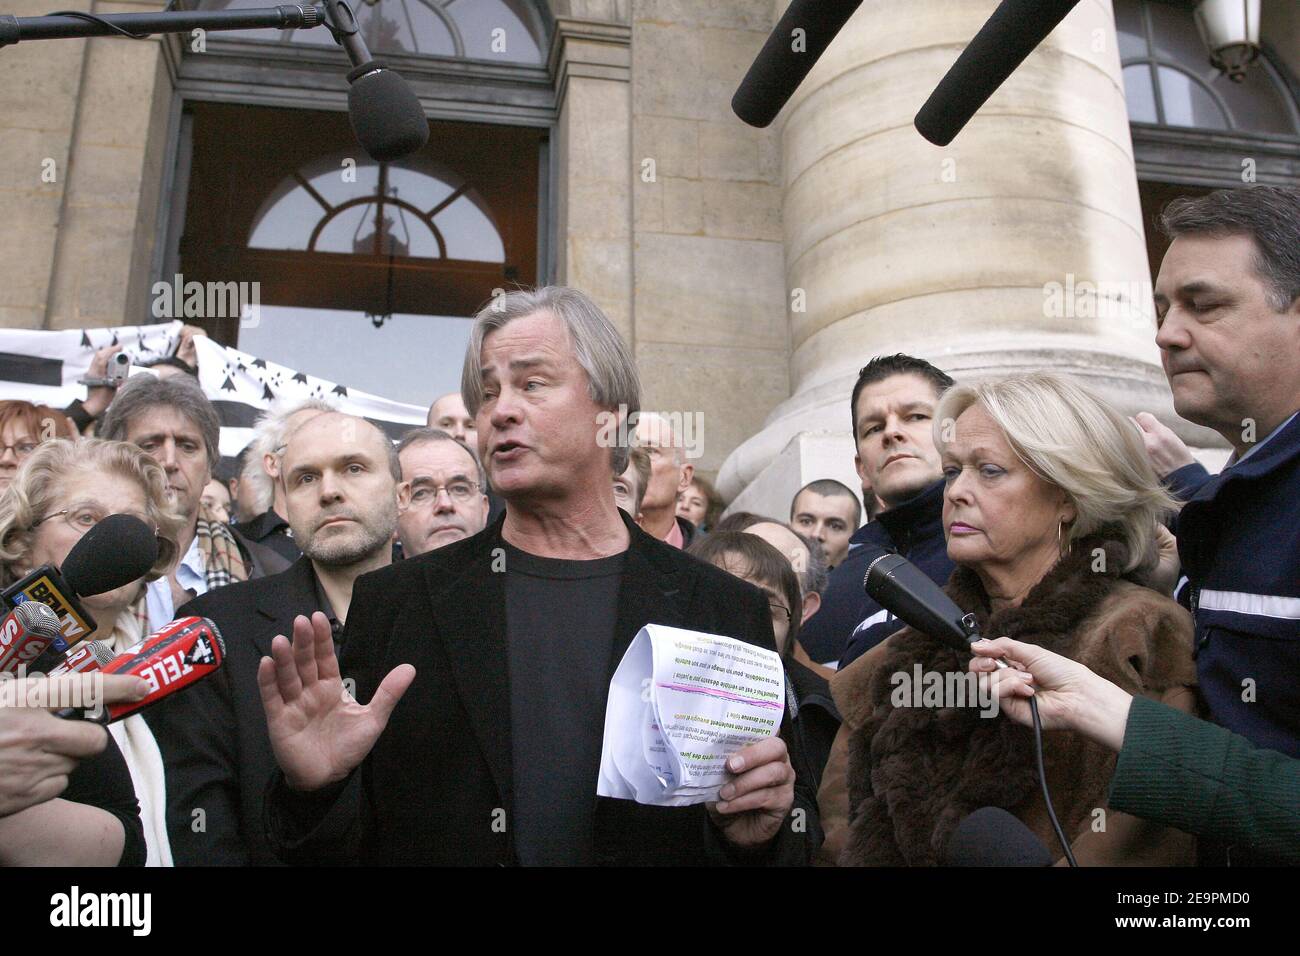 Denis Seznec, grandson of convict Guillaume Seznec (center) with his wife Martine reacts at a special French court upheld a 1924 murder conviction, after persistent doubts about the verdict prompted an ex-justice minister and the convict's family to request that the case be reviewed, outside the Court in Paris, France, on December 14, 2006. Guillaume Seznec was sentenced to a life of hard labor on a French colonial penal colony for the 1923 murder of woodcutter and local official Pierre Quemeneur and maintained his innocence until his death in 1954, and for decades his family has sought to cle Stock Photo